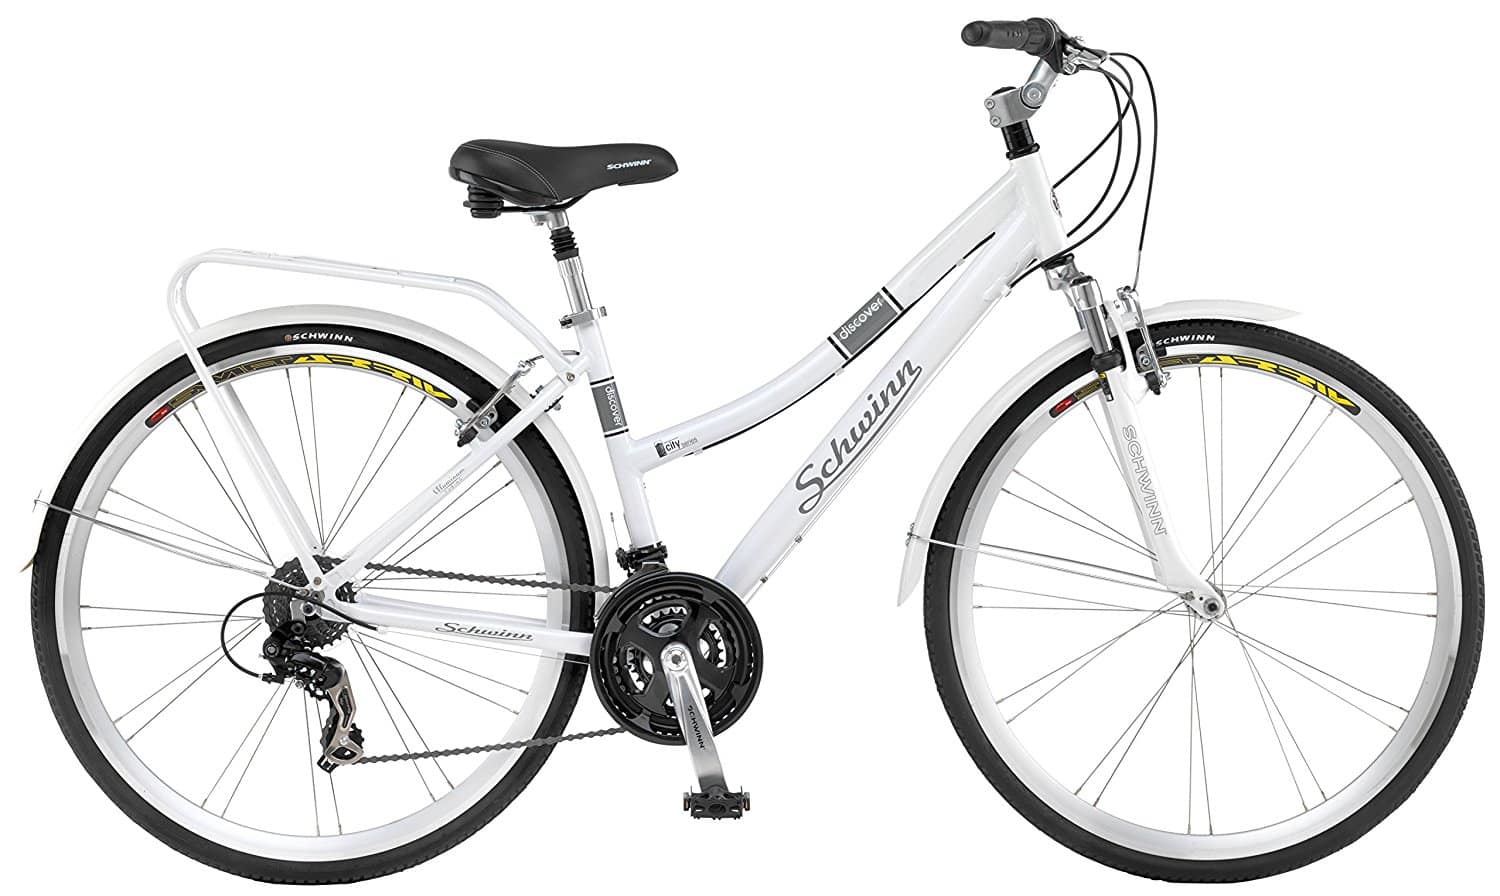 DEAL ALERT: Up to 45% off Select Bicycles and Accessories